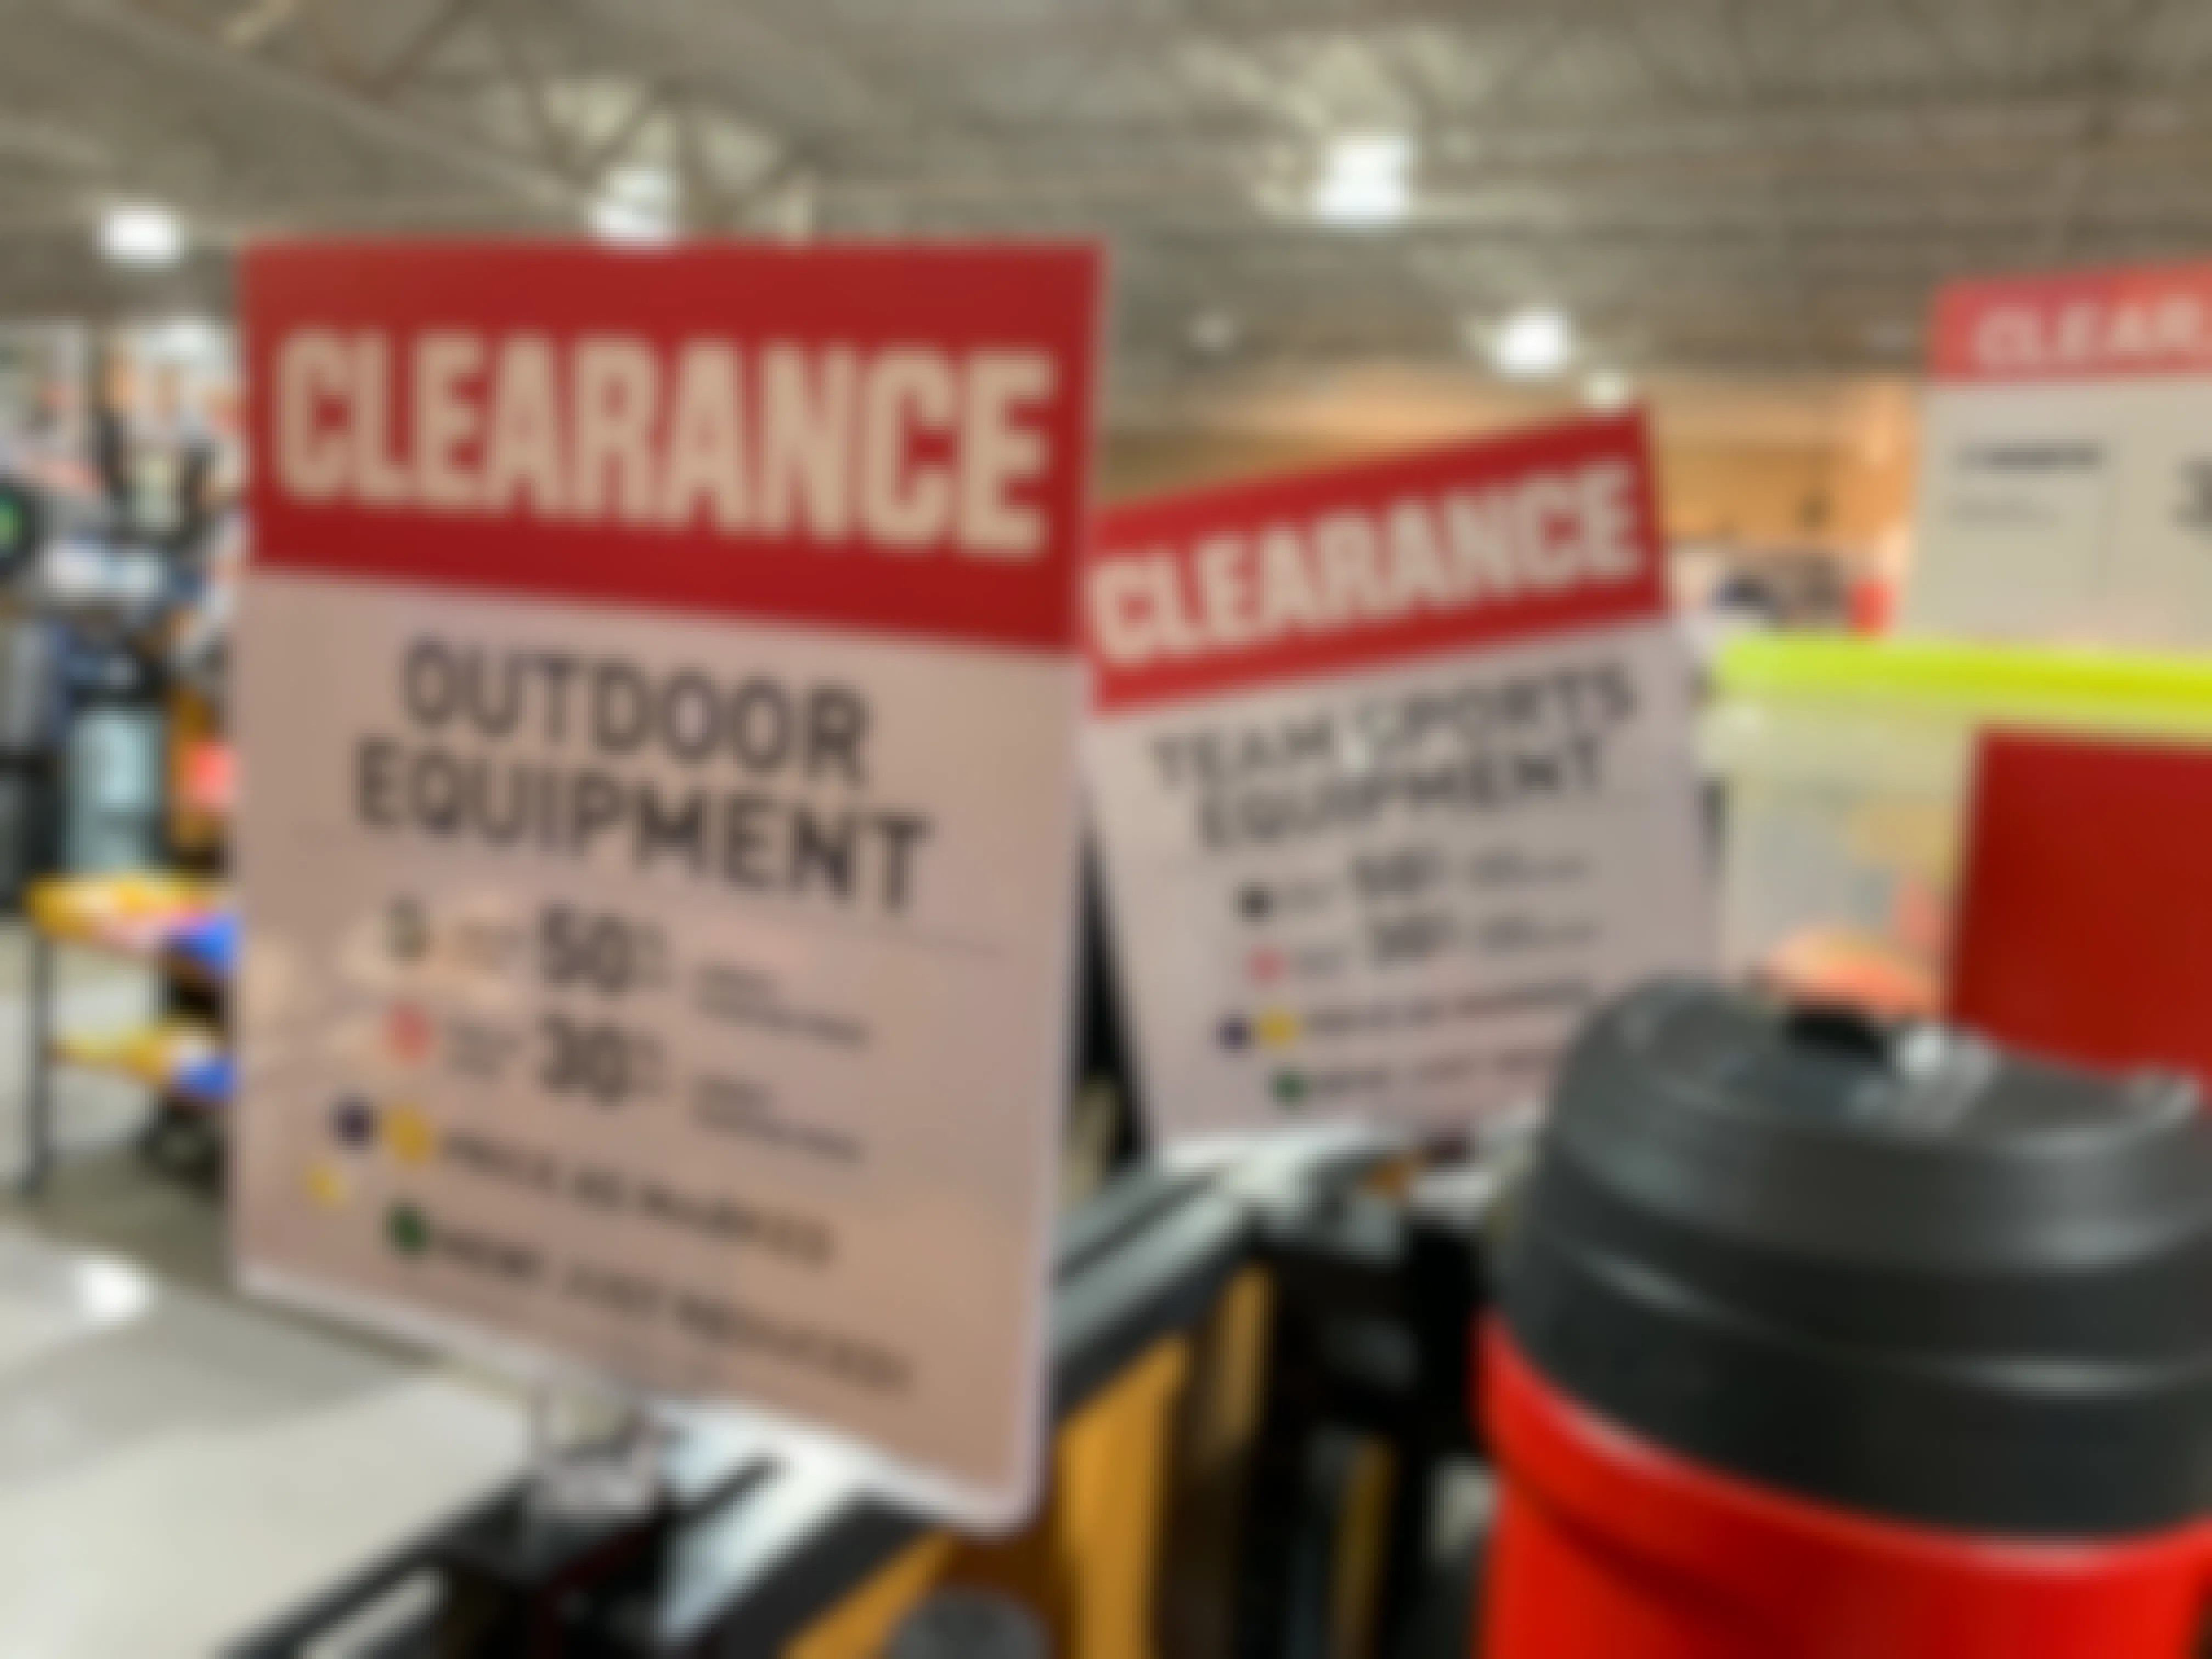 Dick's Sporting Goods clearance signs in-store for shoppers.